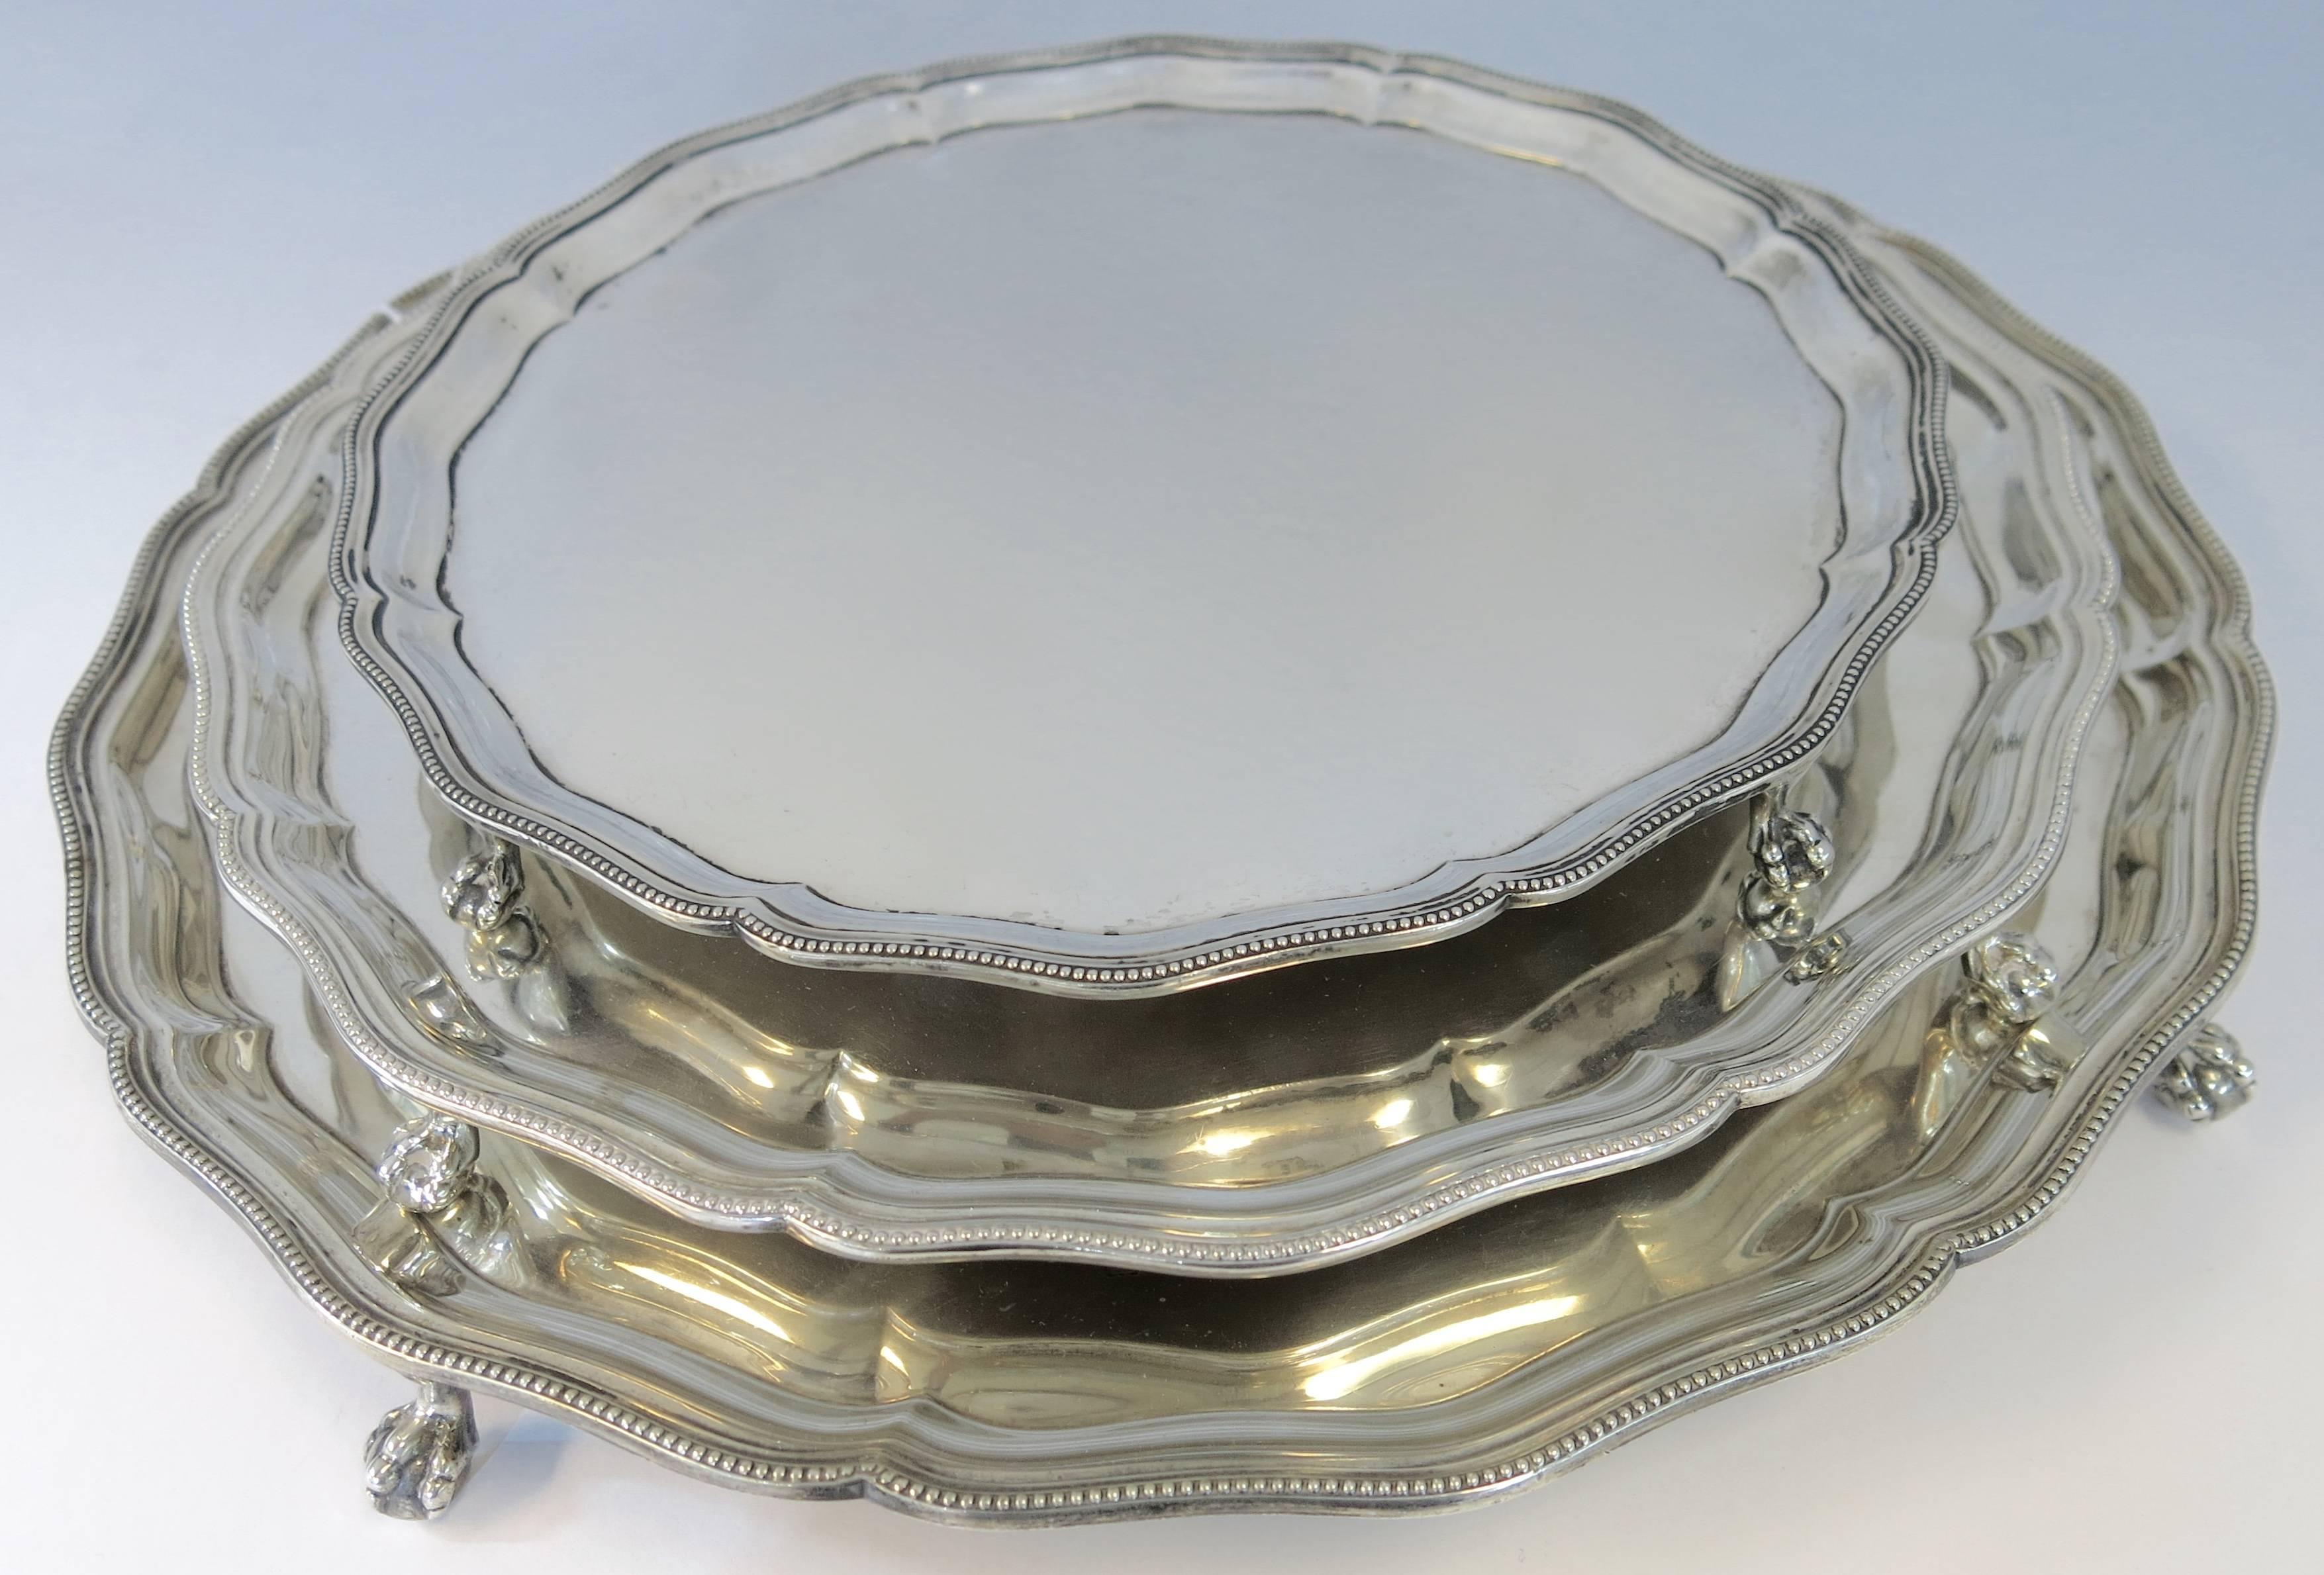 An unusual suite of three, nesting, sterling silver round footed salvers or trays made in England by Ellis Barker / Barker Brothers silversmiths. The three matching salvers are all with a fine bead or pearl applied border, and each stands on four